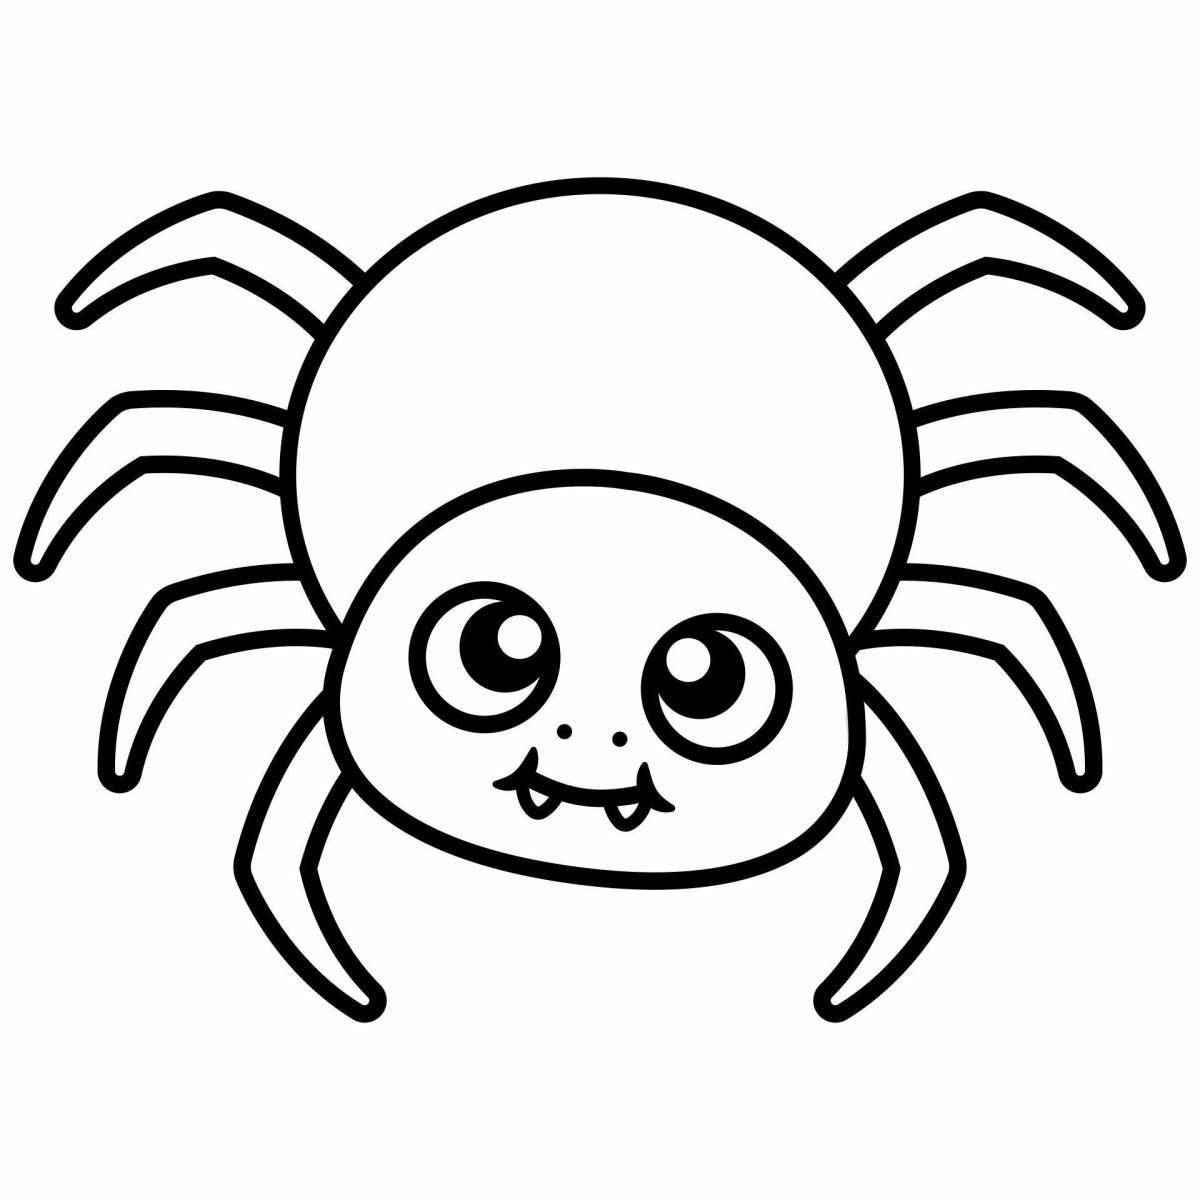 Attractive coloring pages spiders